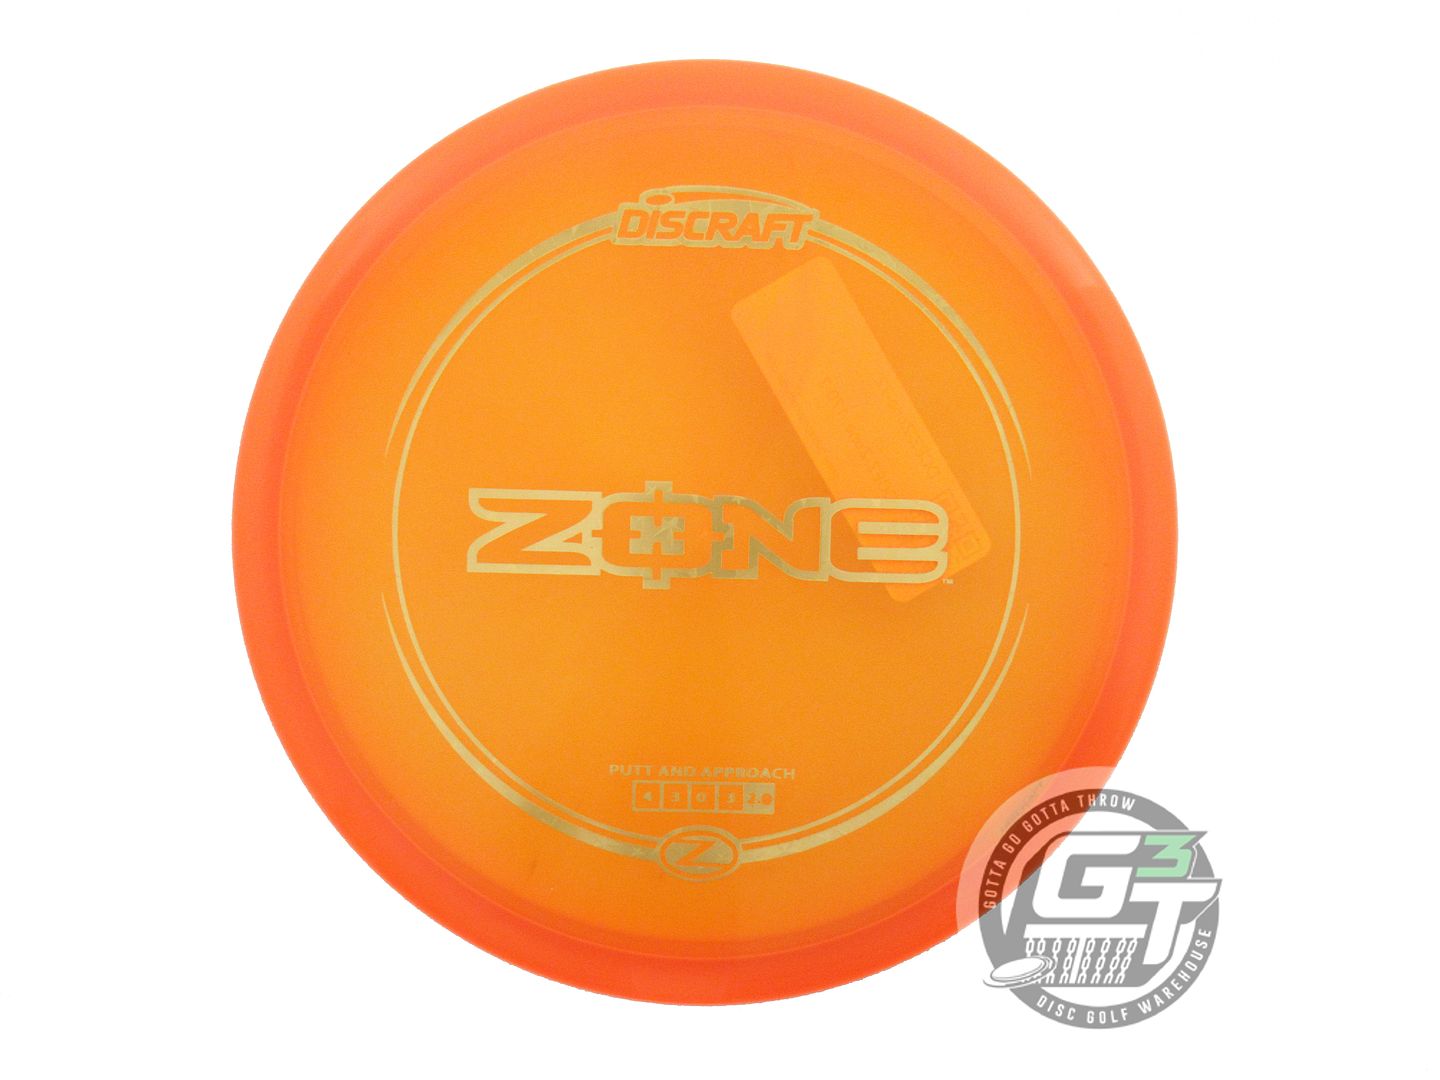 Discraft Elite Z Zone Putter Golf Disc (Individually Listed)